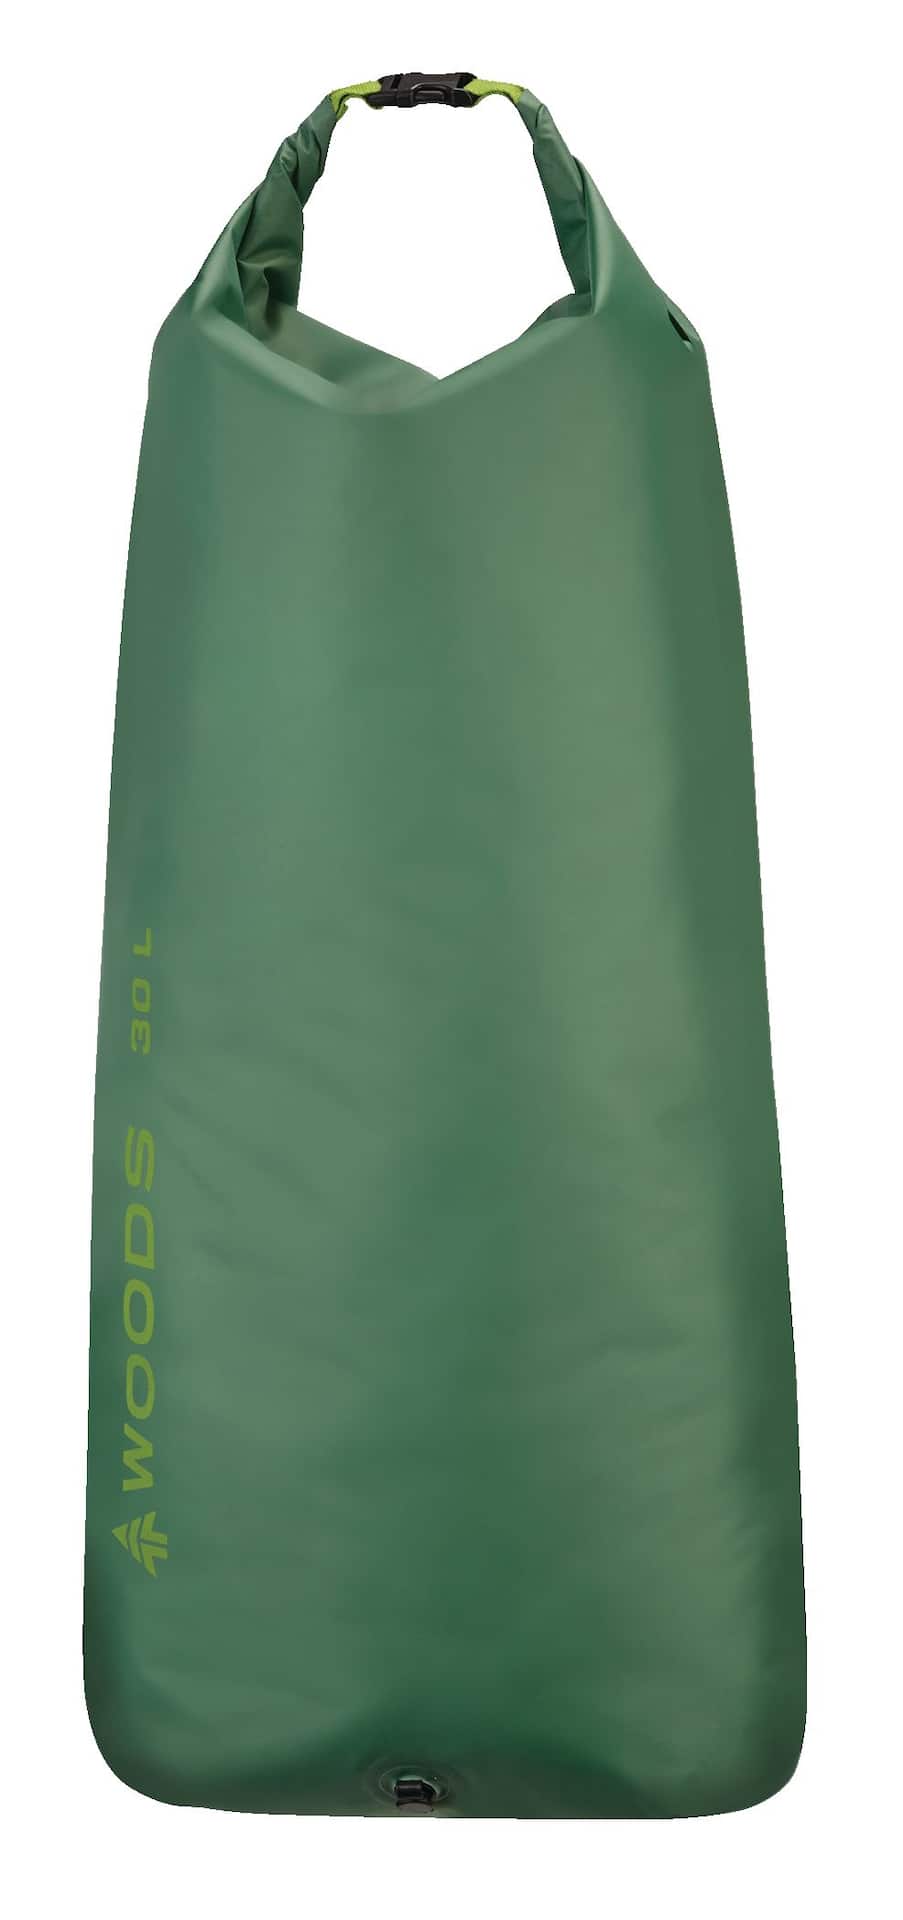 Woods Lightweight Waterproof Dry Bag w/ Valve For Camping, Hiking & Water  Sports, 30-L, Green